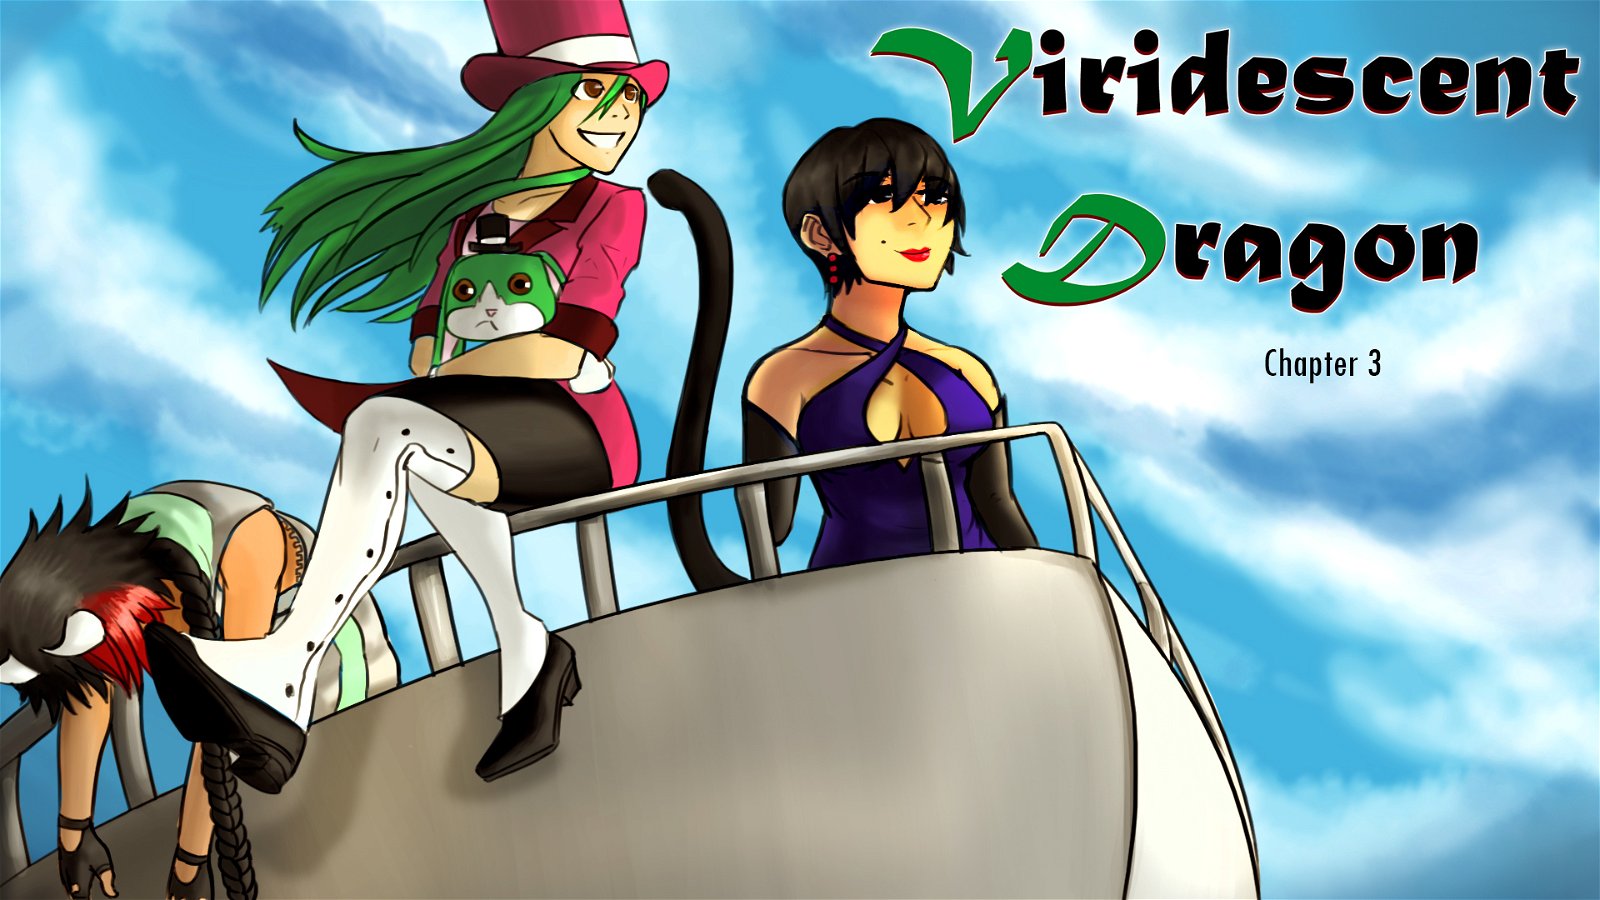 Image of Viridescent Dragon: Chapter 3